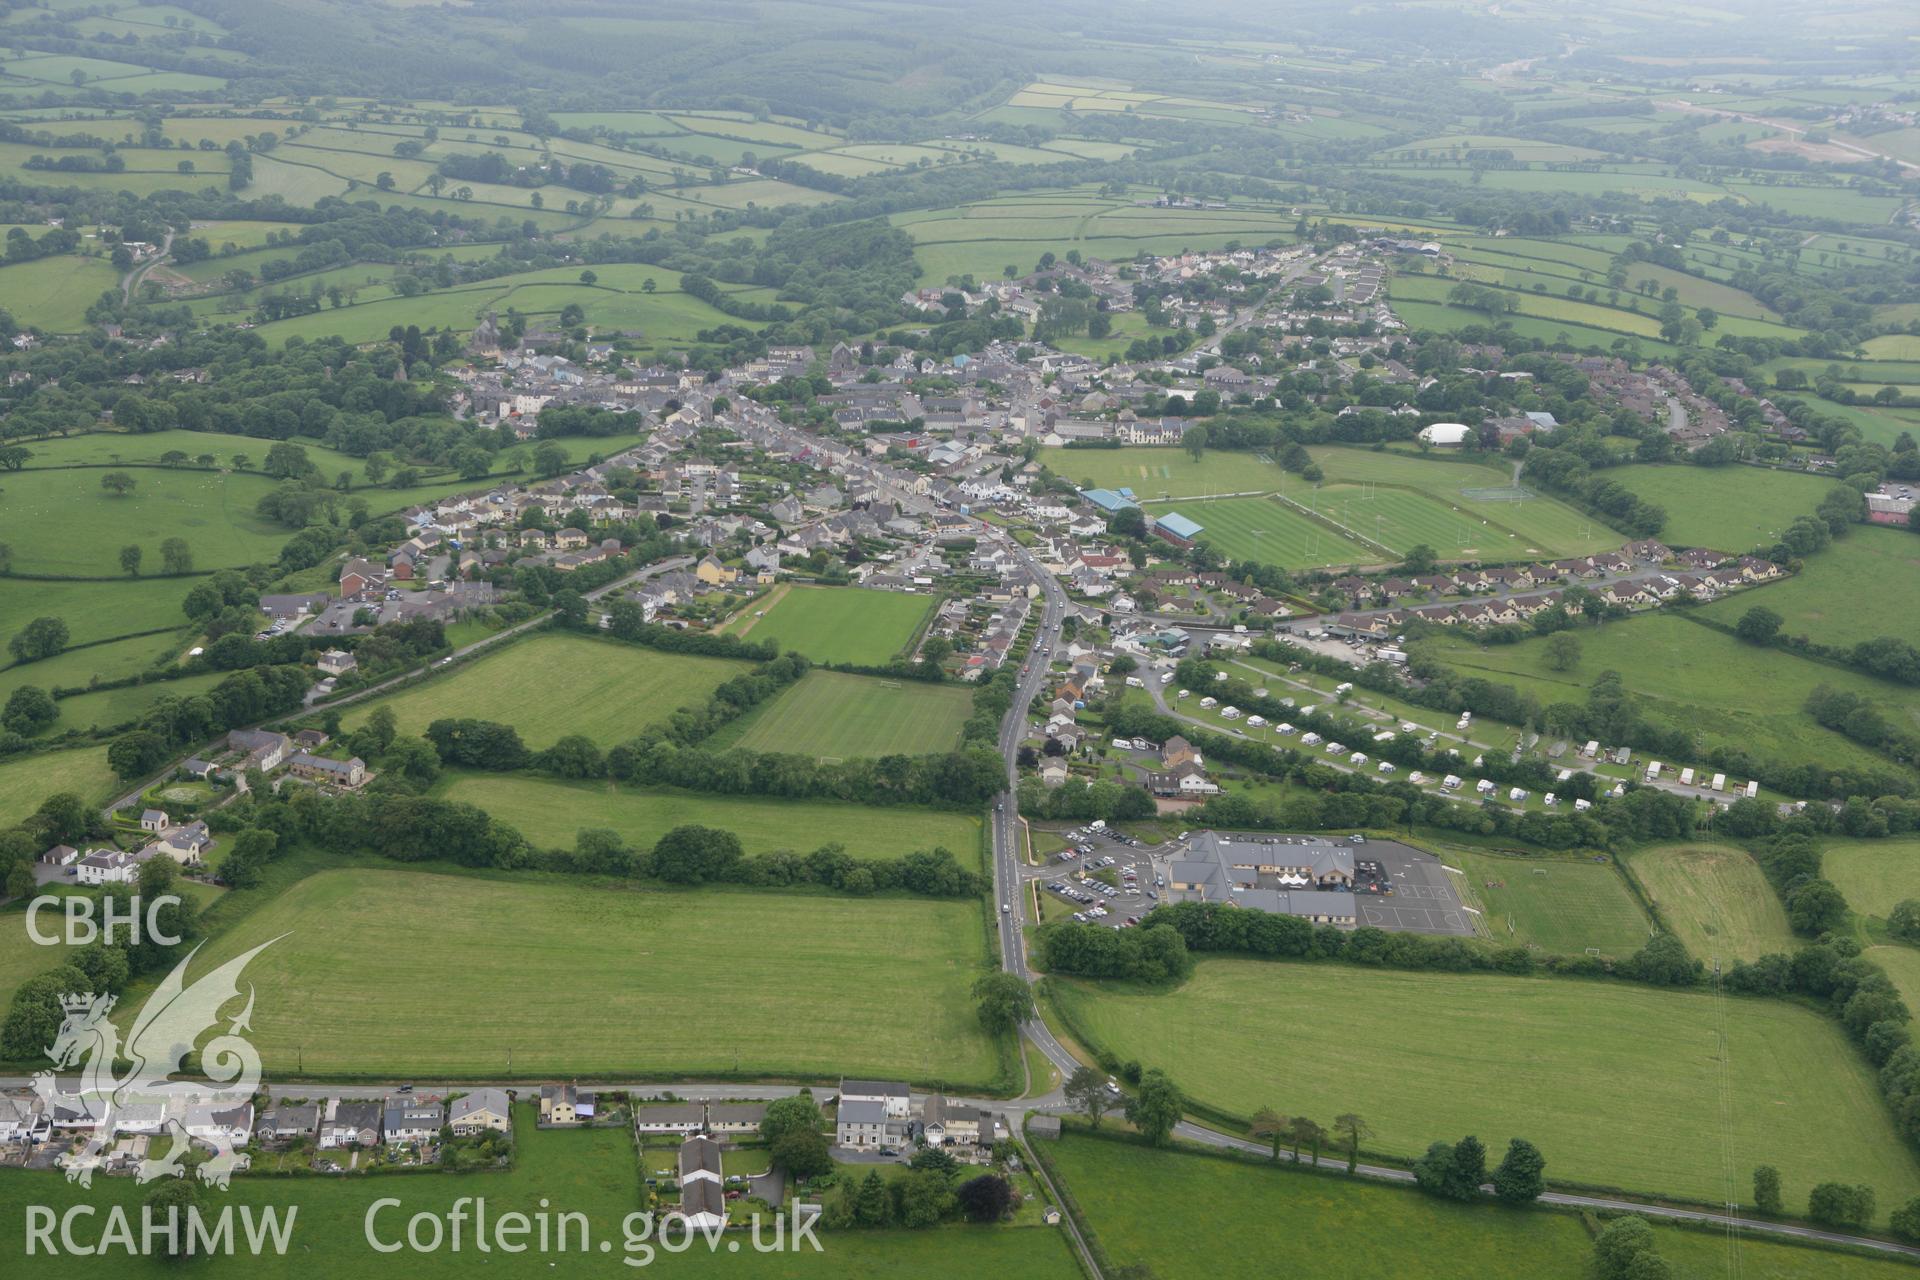 RCAHMW colour oblique photograph of Narberth town. Taken by Toby Driver on 11/06/2010.